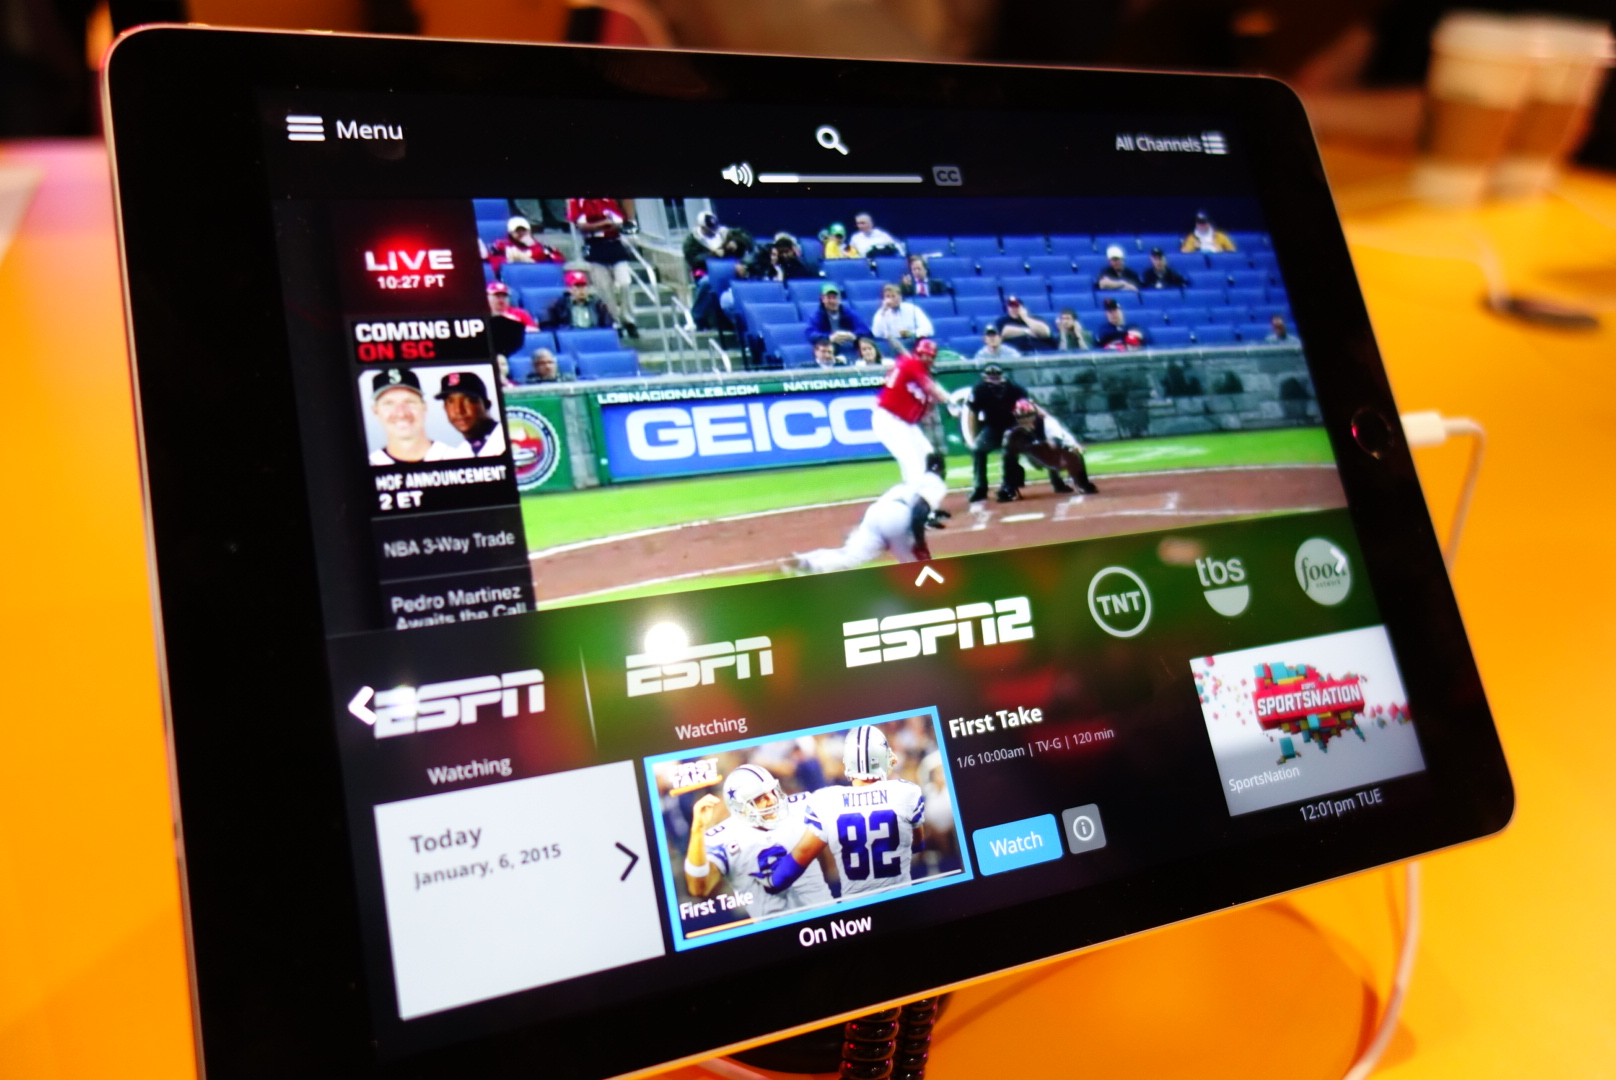 Sling TV: Data Caps Are Cable Industry Tool To “Sabotage” Streaming Video